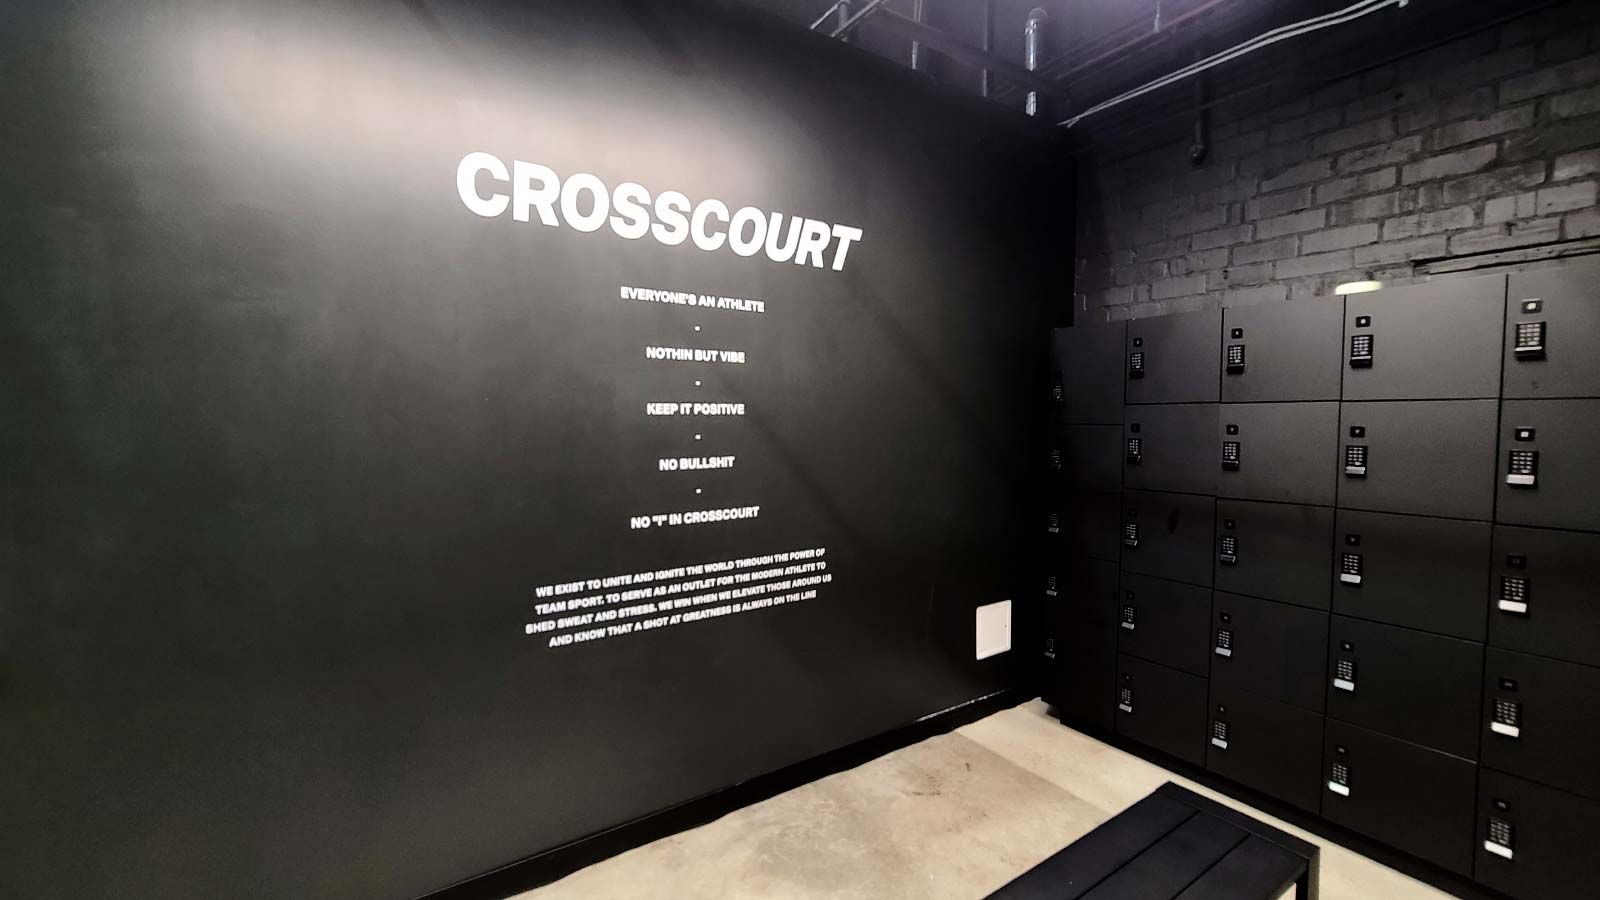 Crosscourt gym sign attached to the wall